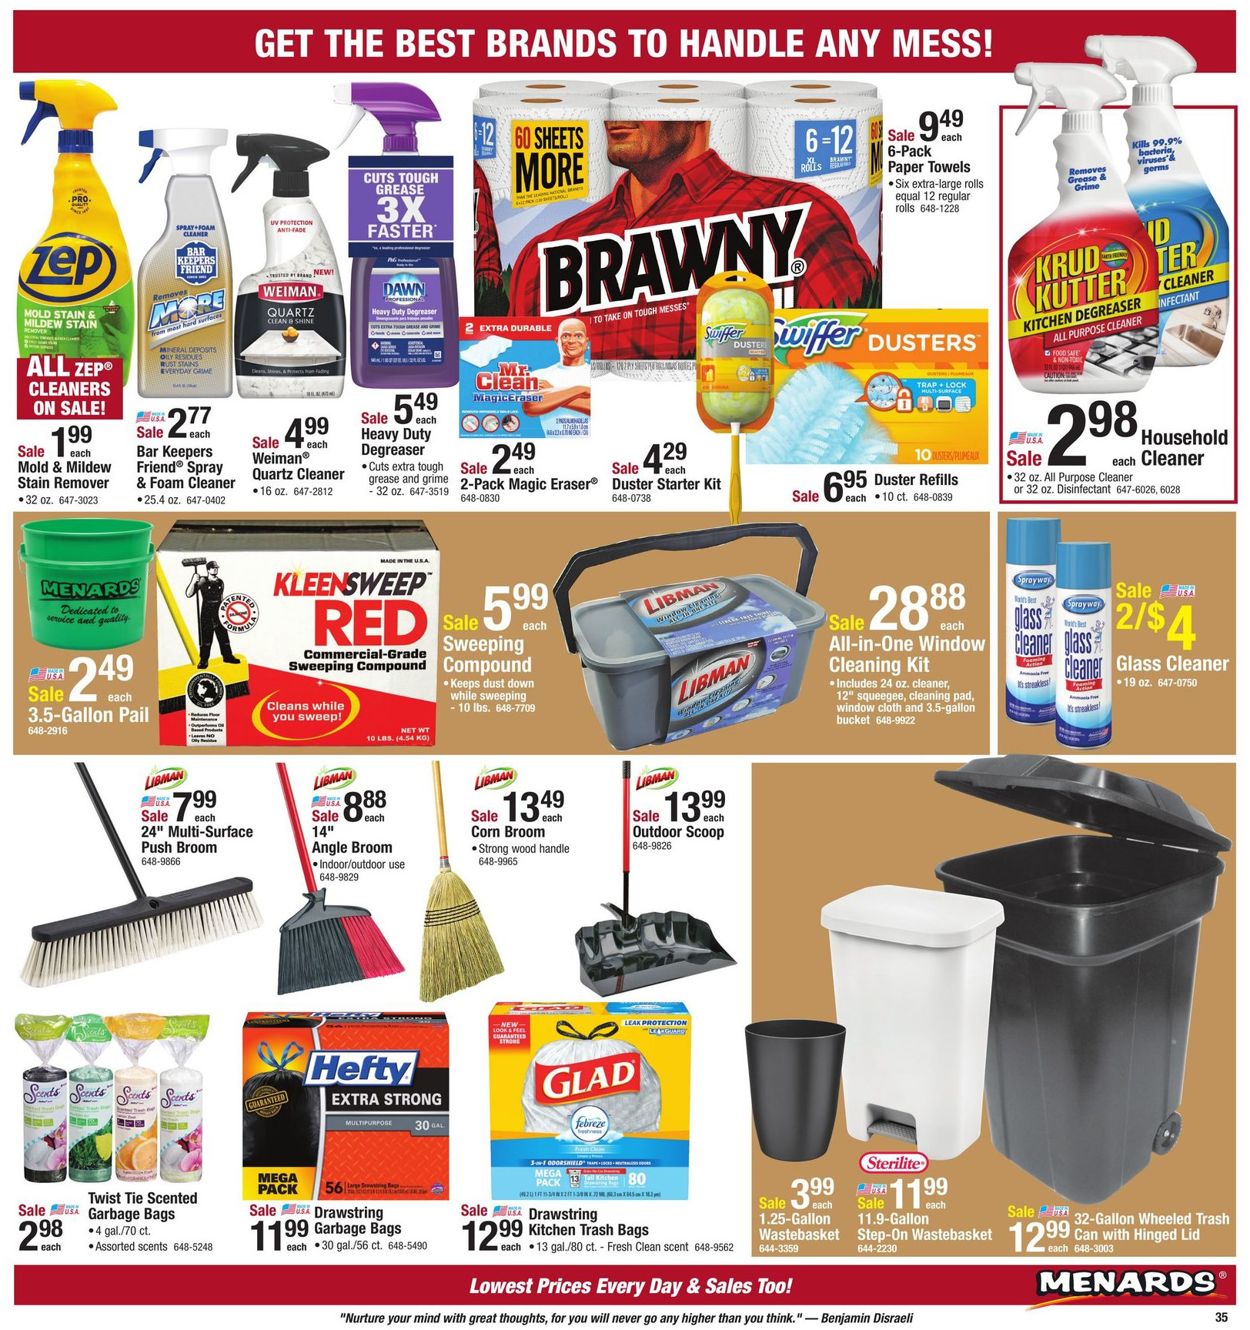 Menards Current weekly ad 09/08 - 09/21/2019 [43] - frequent-ads.com